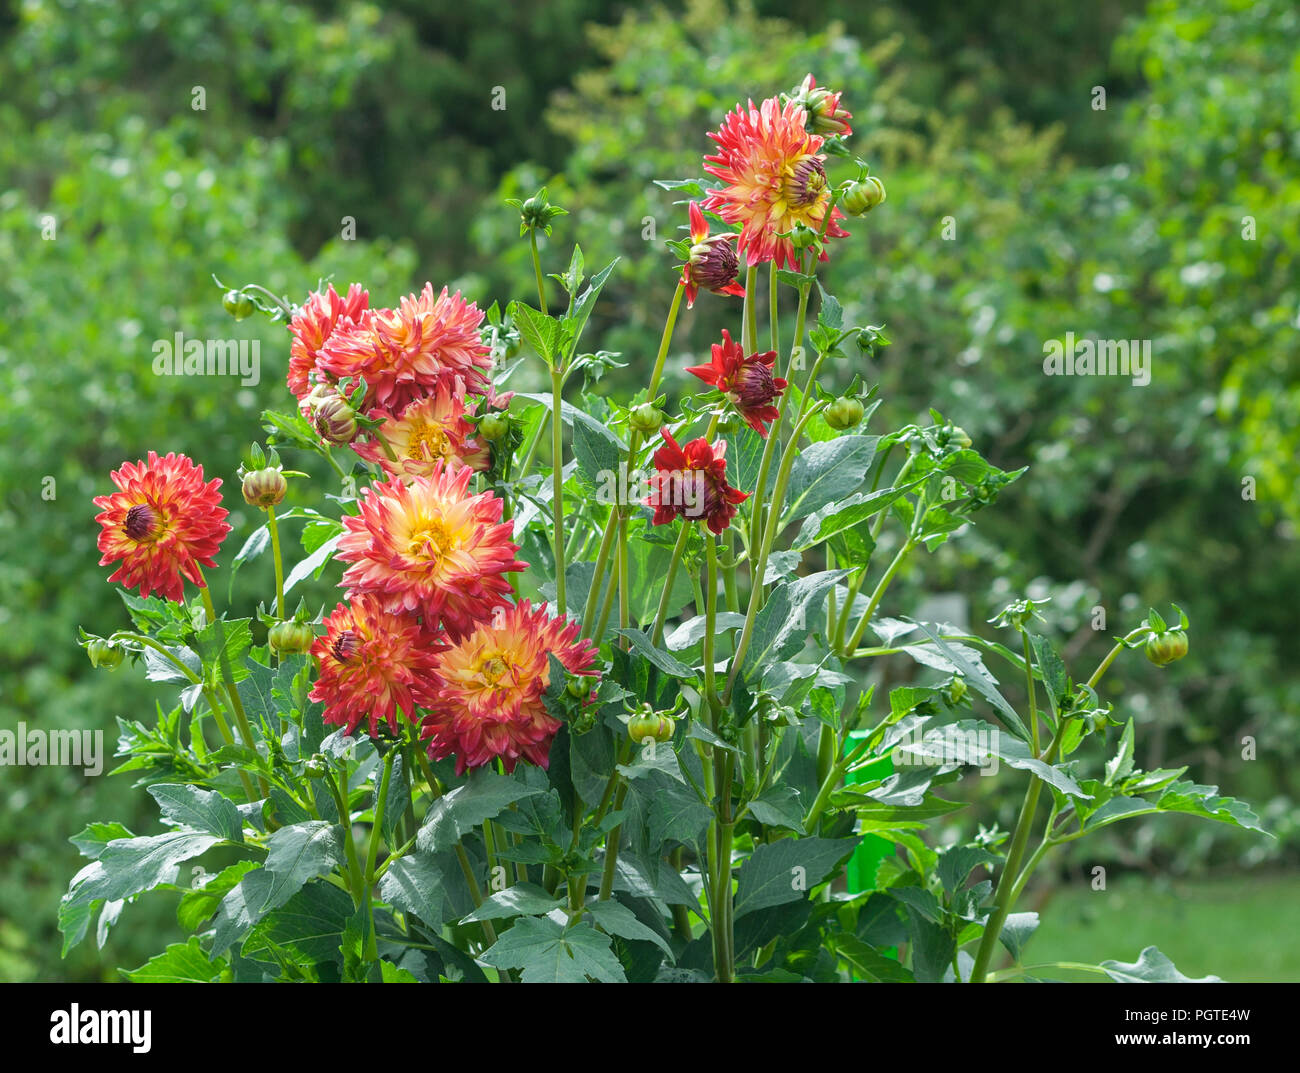 asteraceae dahlia cultorum grade wildcat orange-red flowers asters in bloom and buds against the background of green foliage and trees Stock Photo